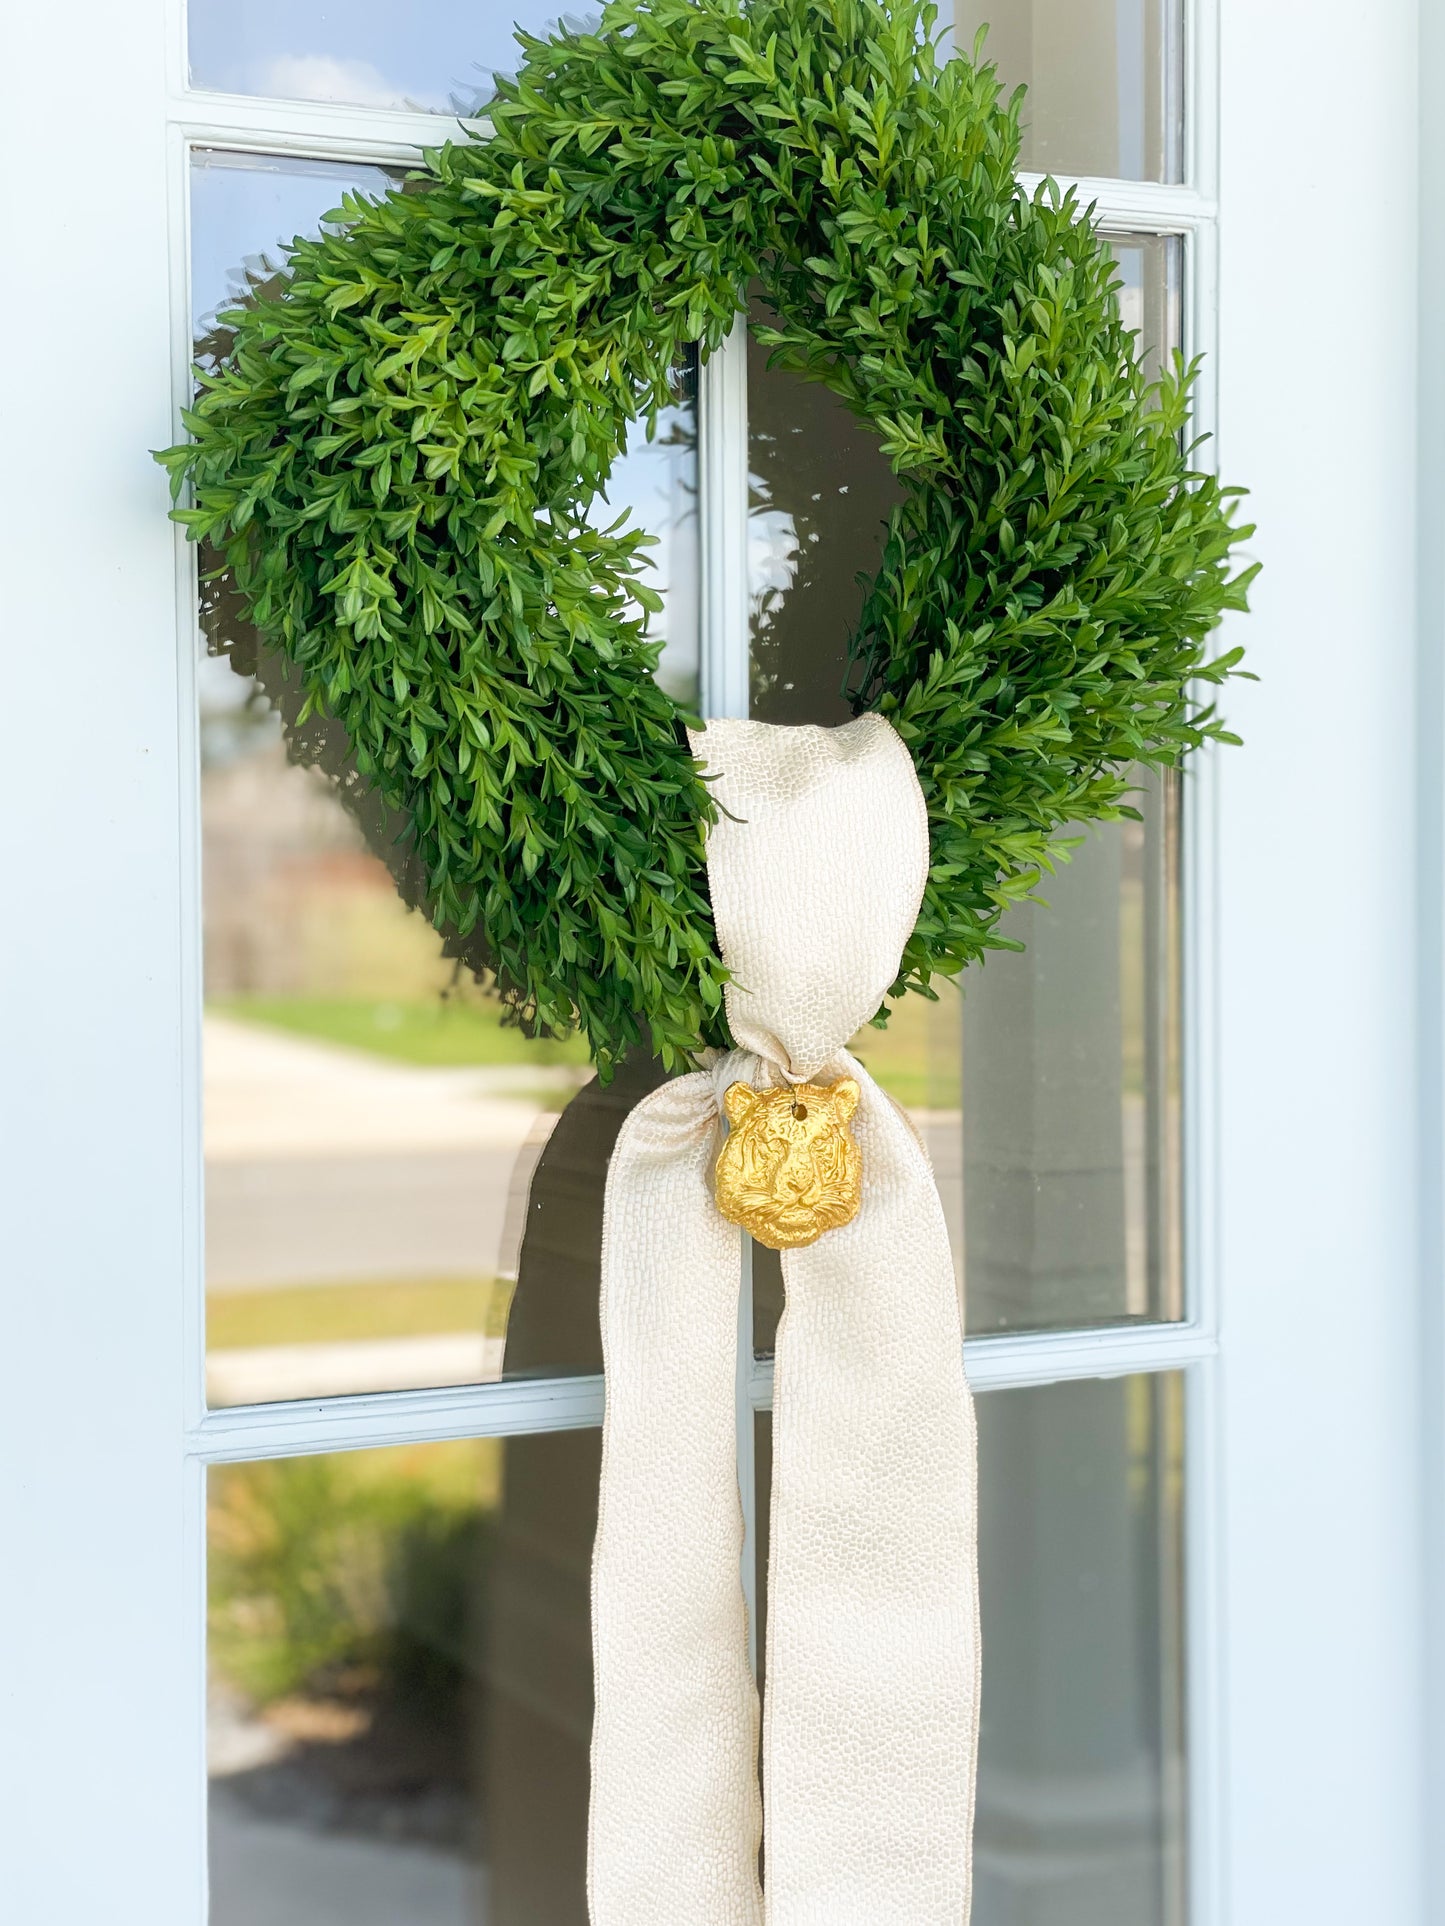 Geaux Wreath And Sash With Tiger Head